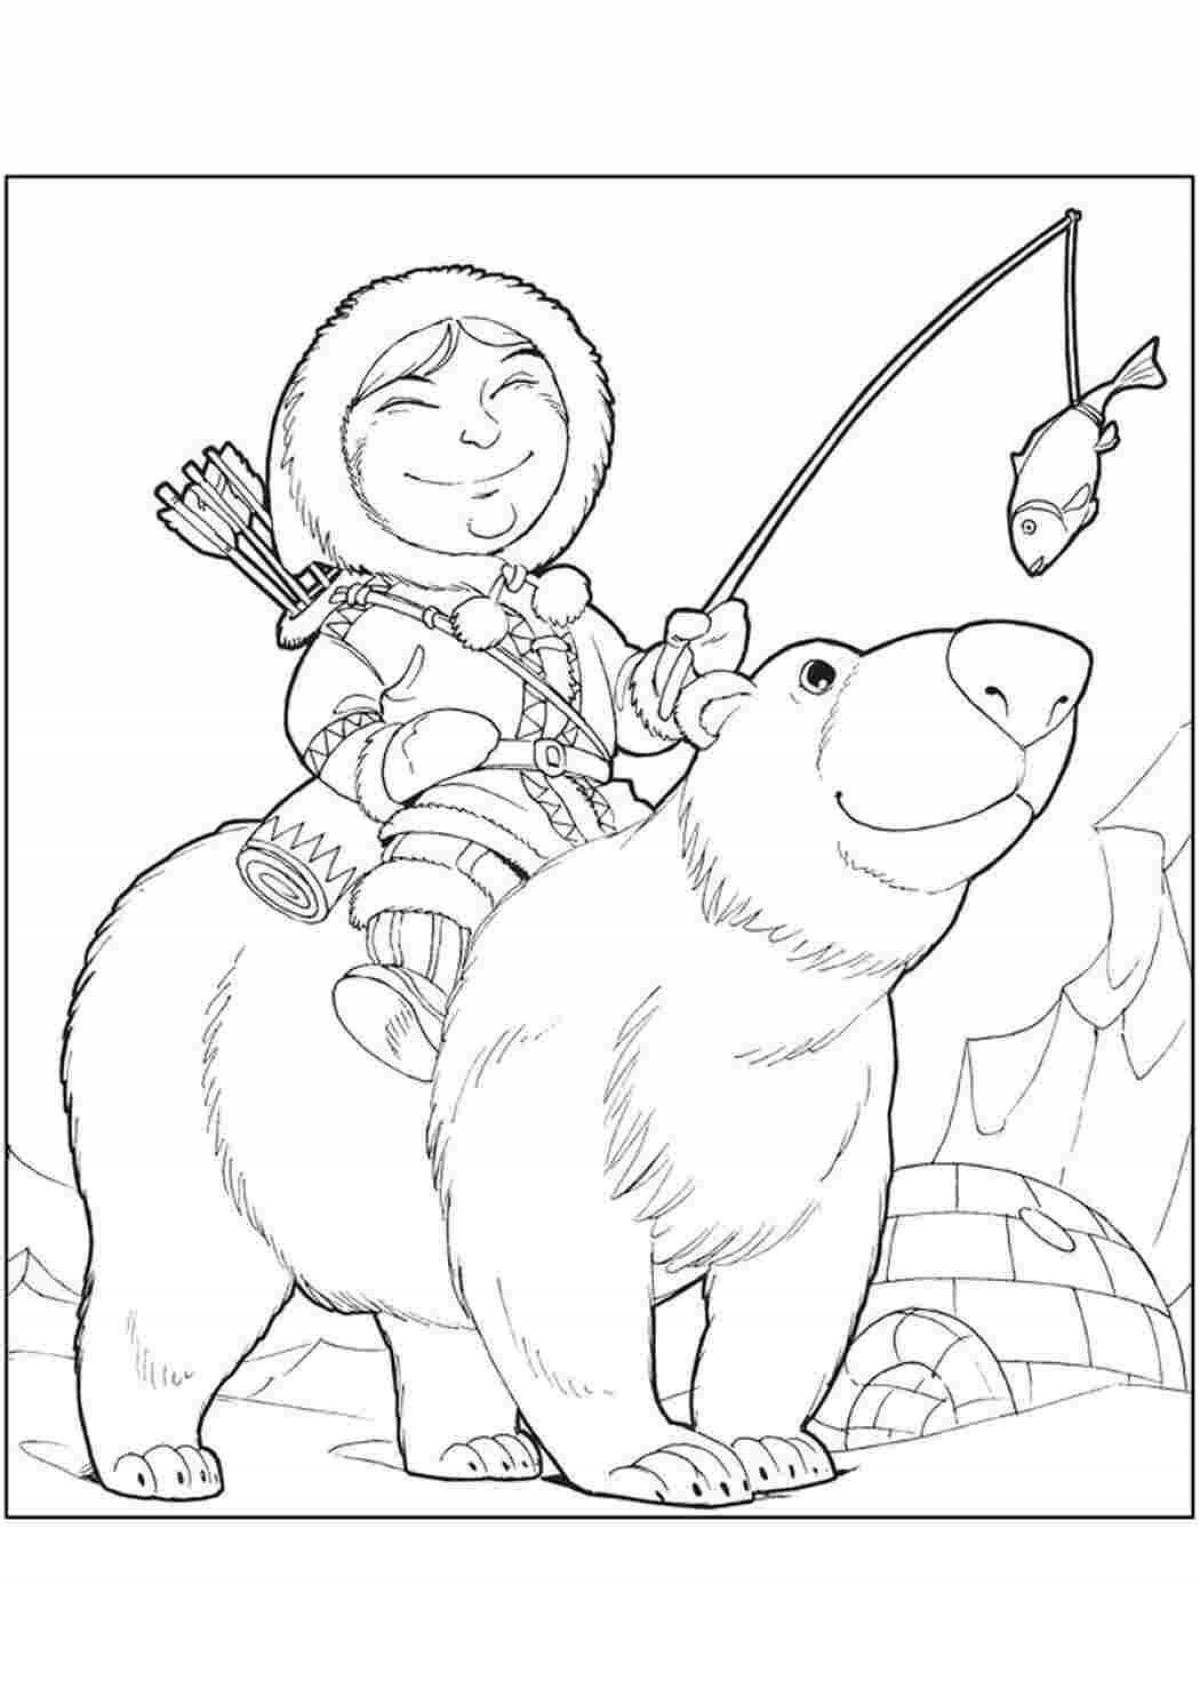 Fun Sami coloring pages for kids